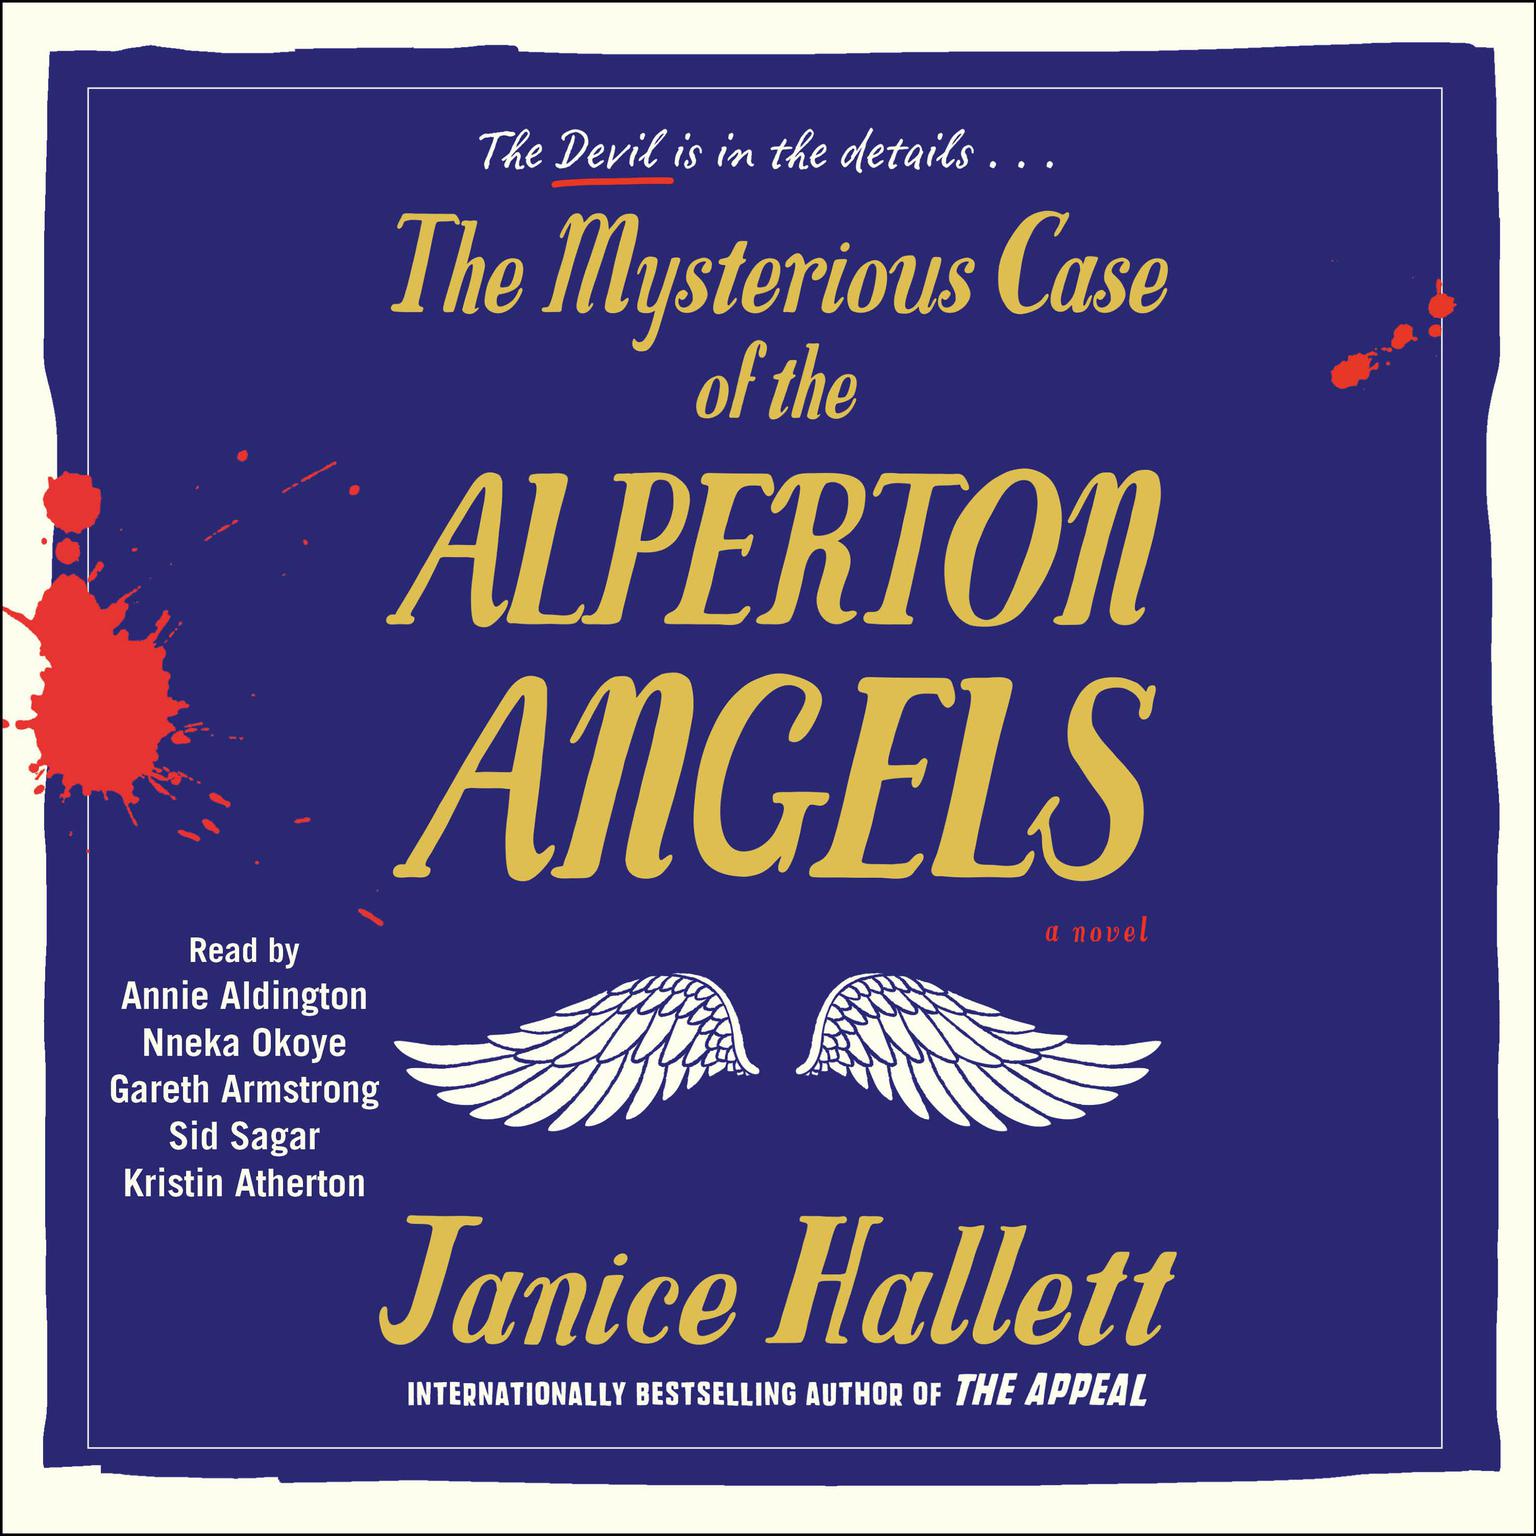 The Mysterious Case of the Alperton Angels: A Novel Audiobook, by Janice Hallett